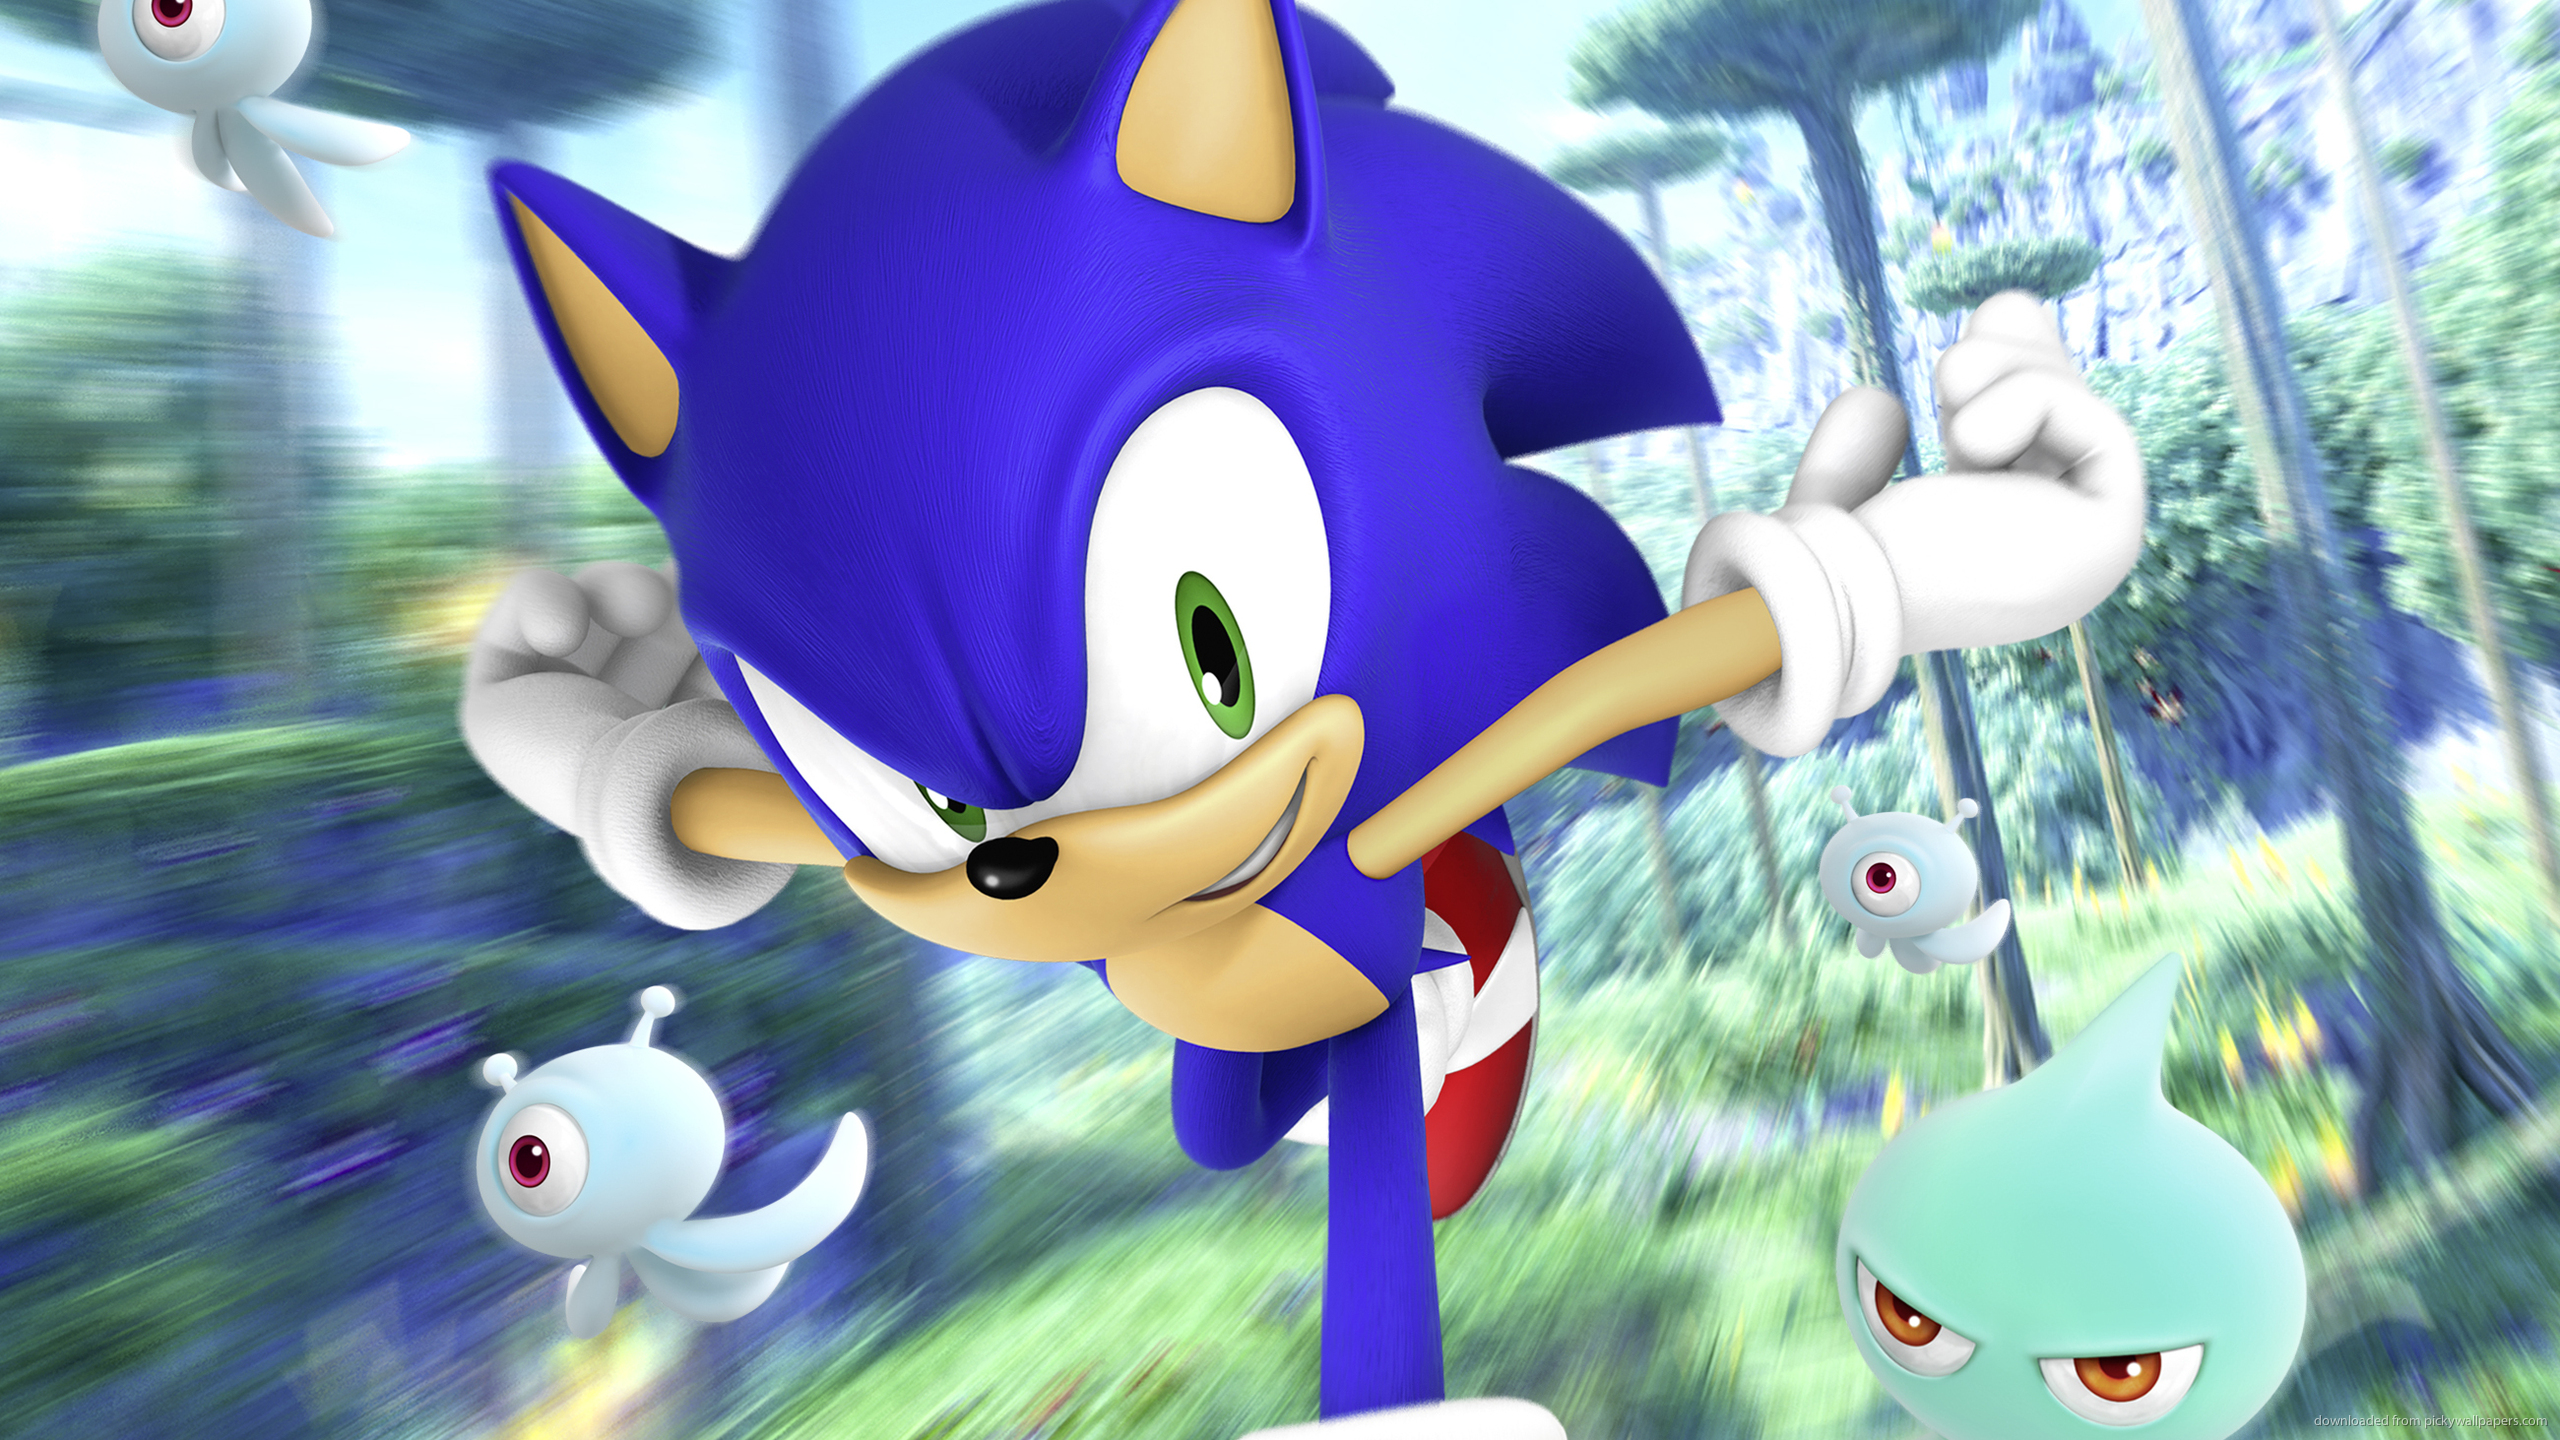 sonic colors wallpaper,animated cartoon,sonic the hedgehog,cartoon,fictional character,adventure game